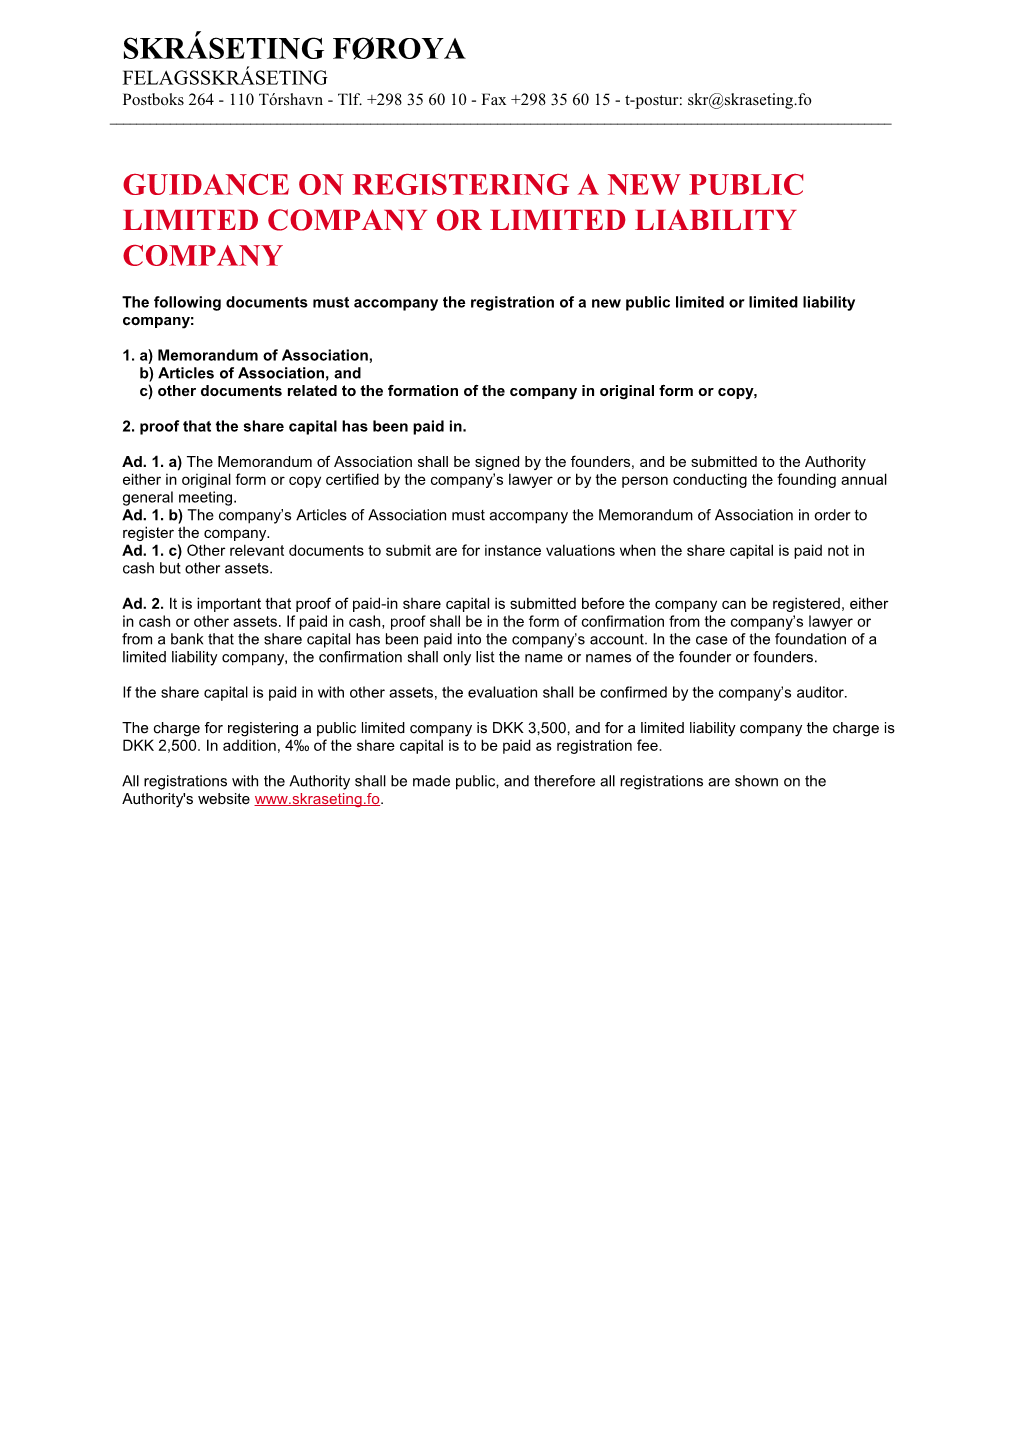 Guidance on Registering a New Public Limited Company Or Limited Liability Company